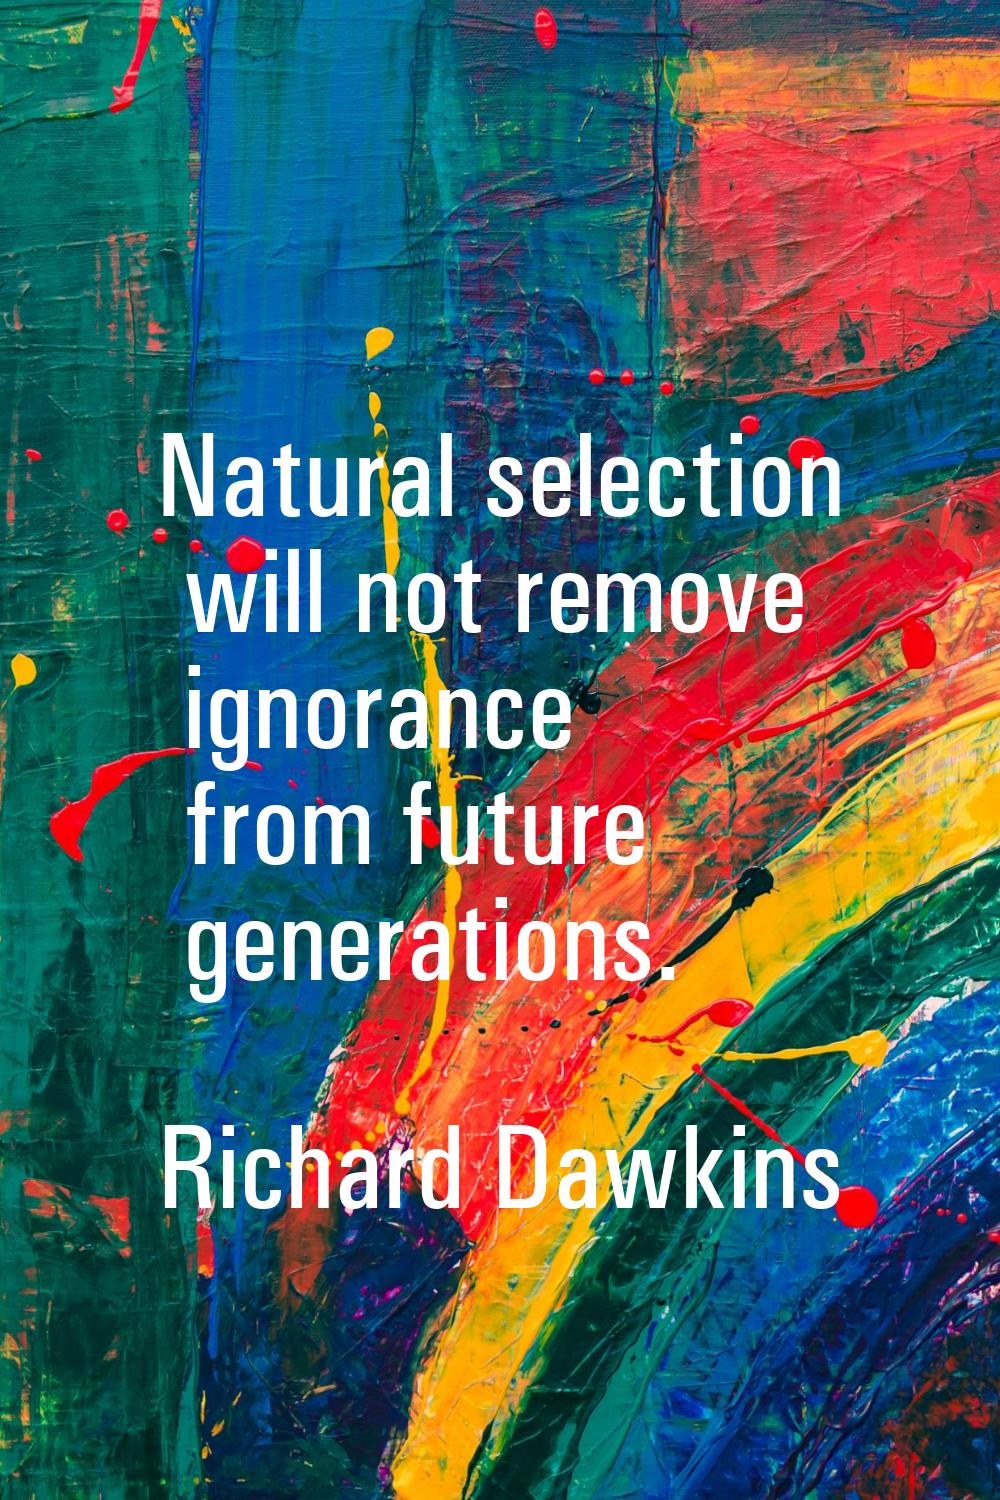 Natural selection will not remove ignorance from future generations.